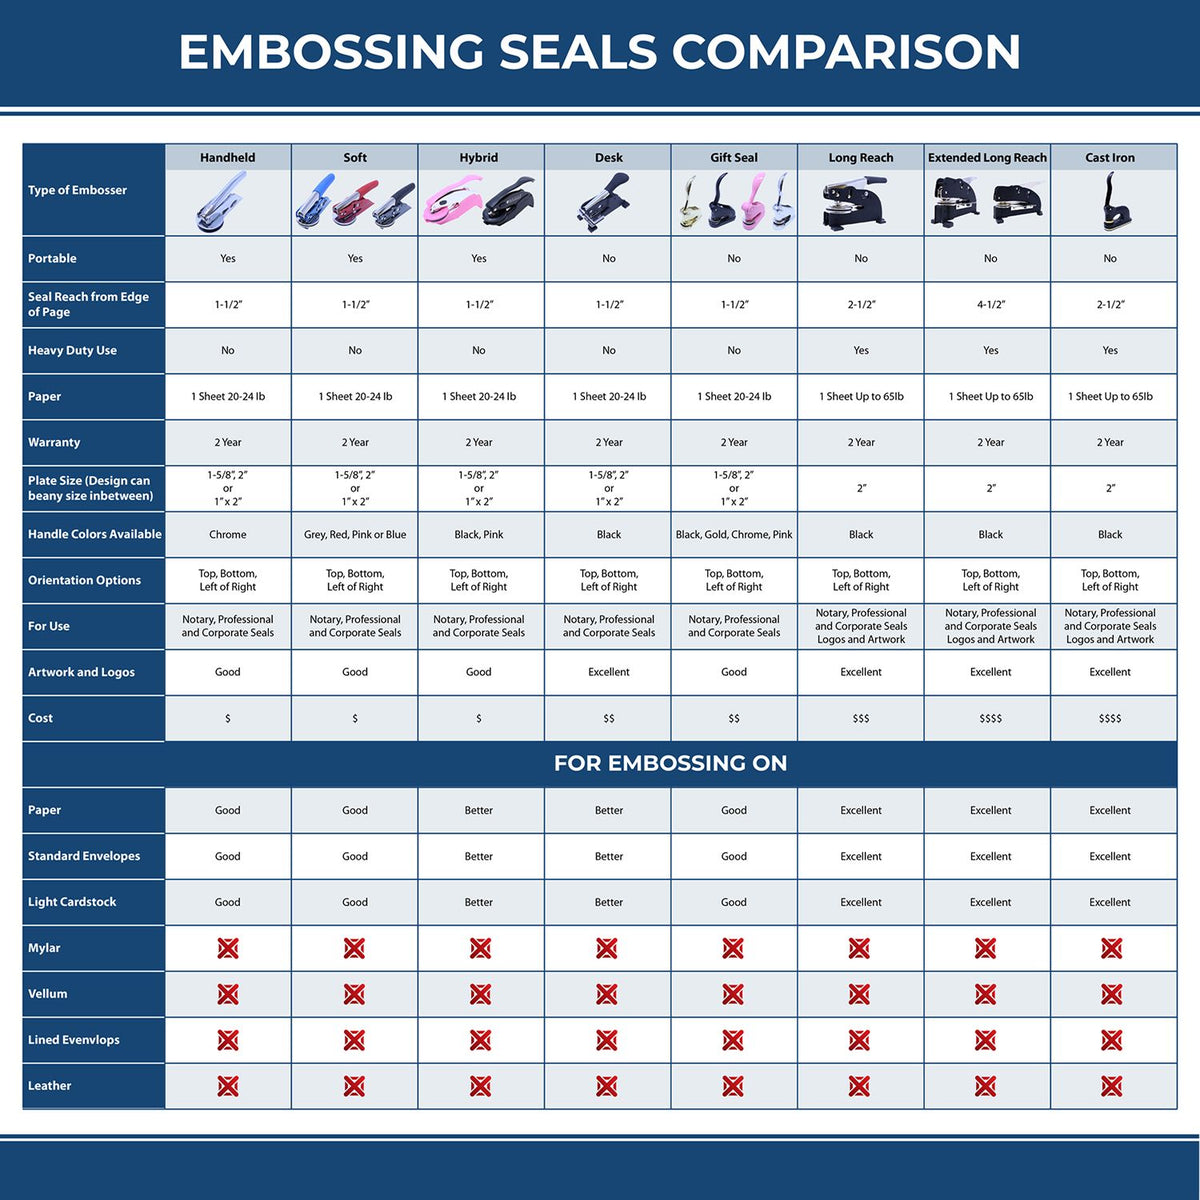 A comparison chart for the different types of mount models available for the Soft Arizona Professional Engineer Seal.